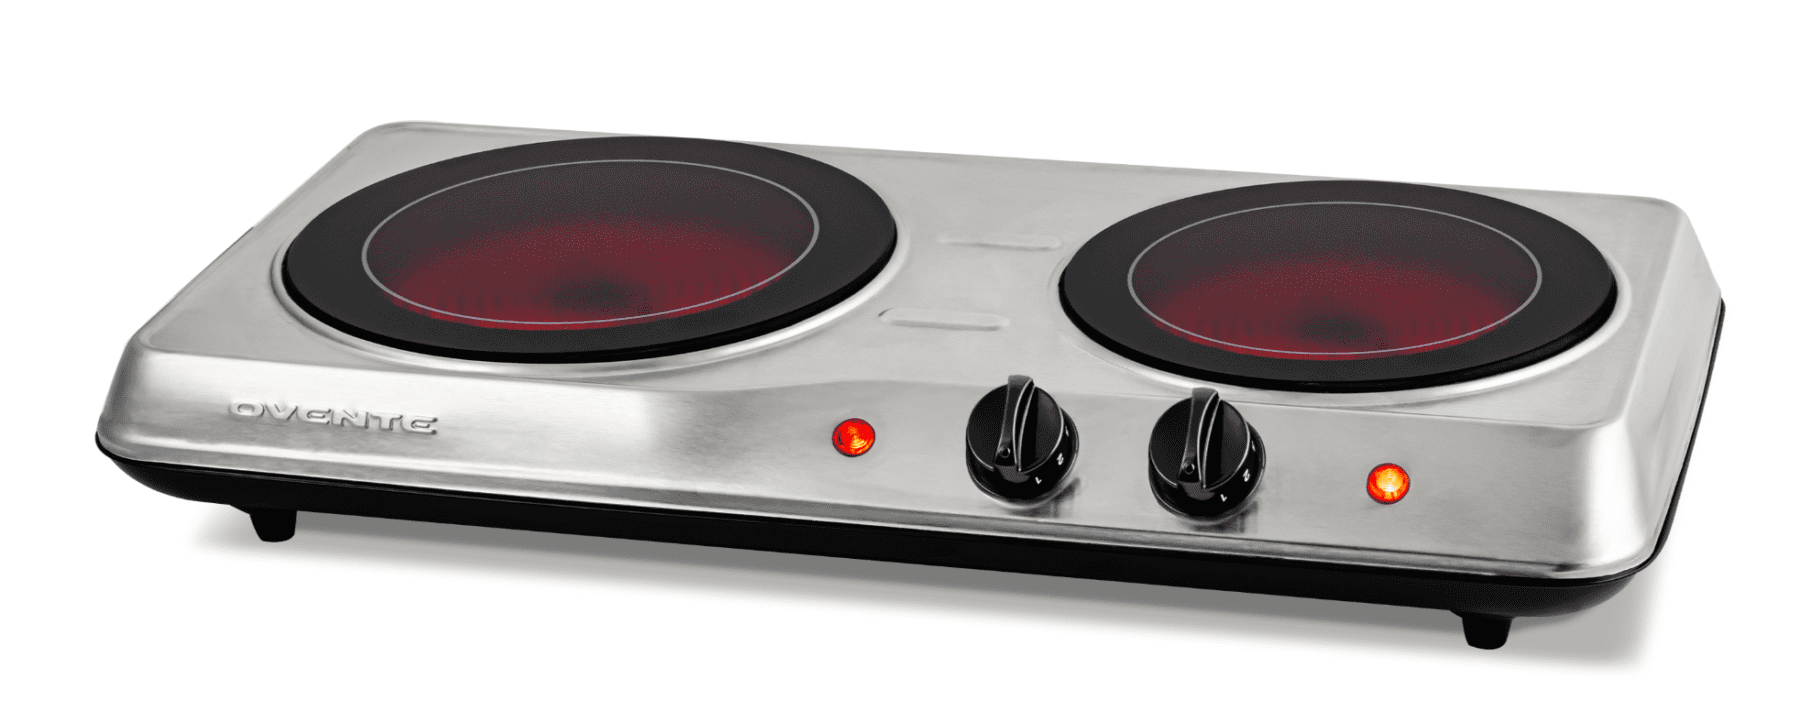 Cooking through Induction Stove – Danger (or) Healthy? – BookMyScans